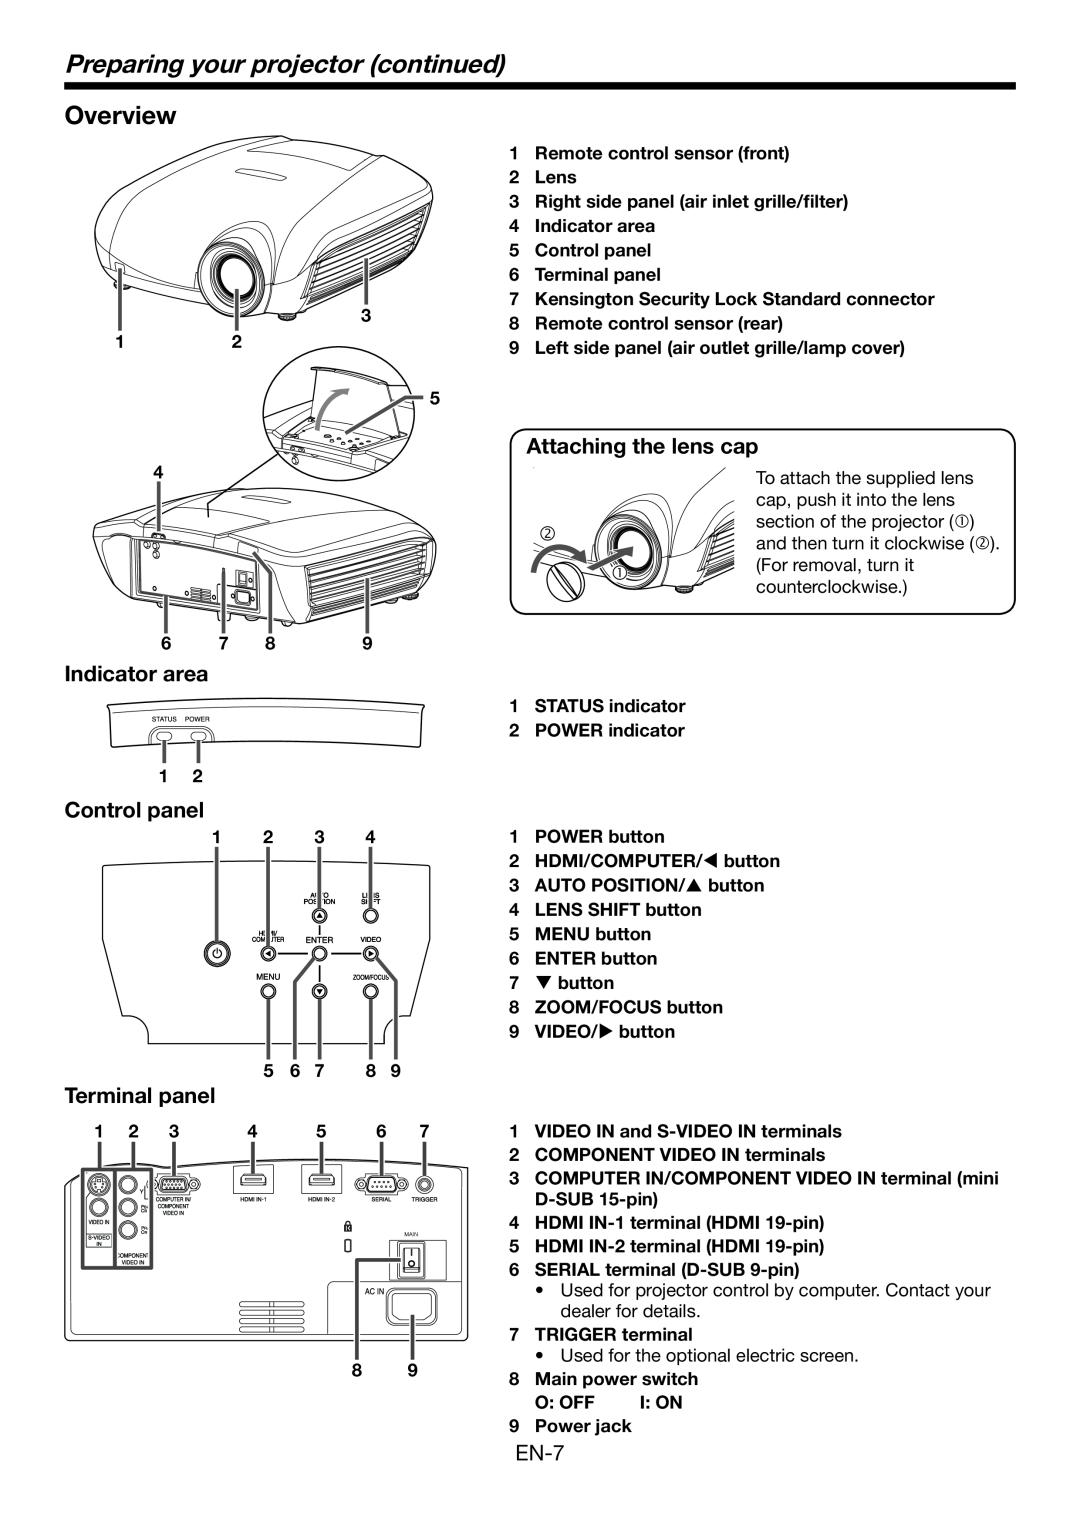 Mitsubishi Electronics HC6800 Preparing your projector continued, Overview, Attaching the lens cap, Indicator area, O Off 